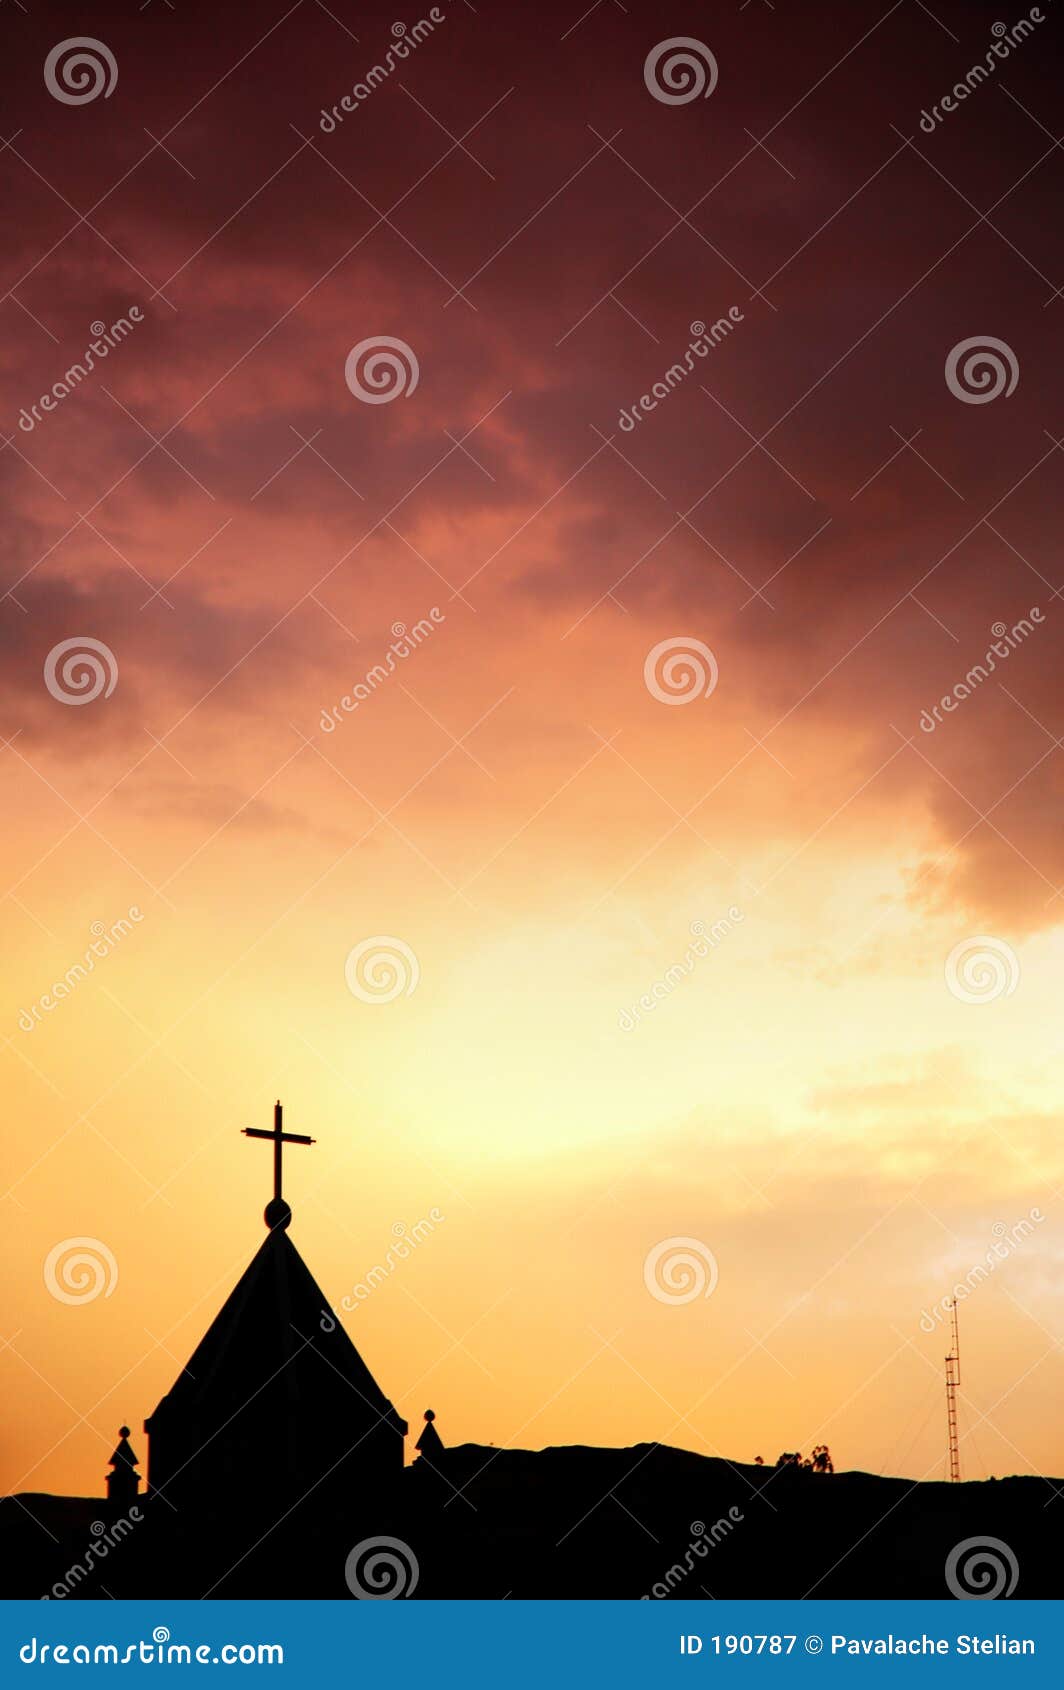 church and red sky